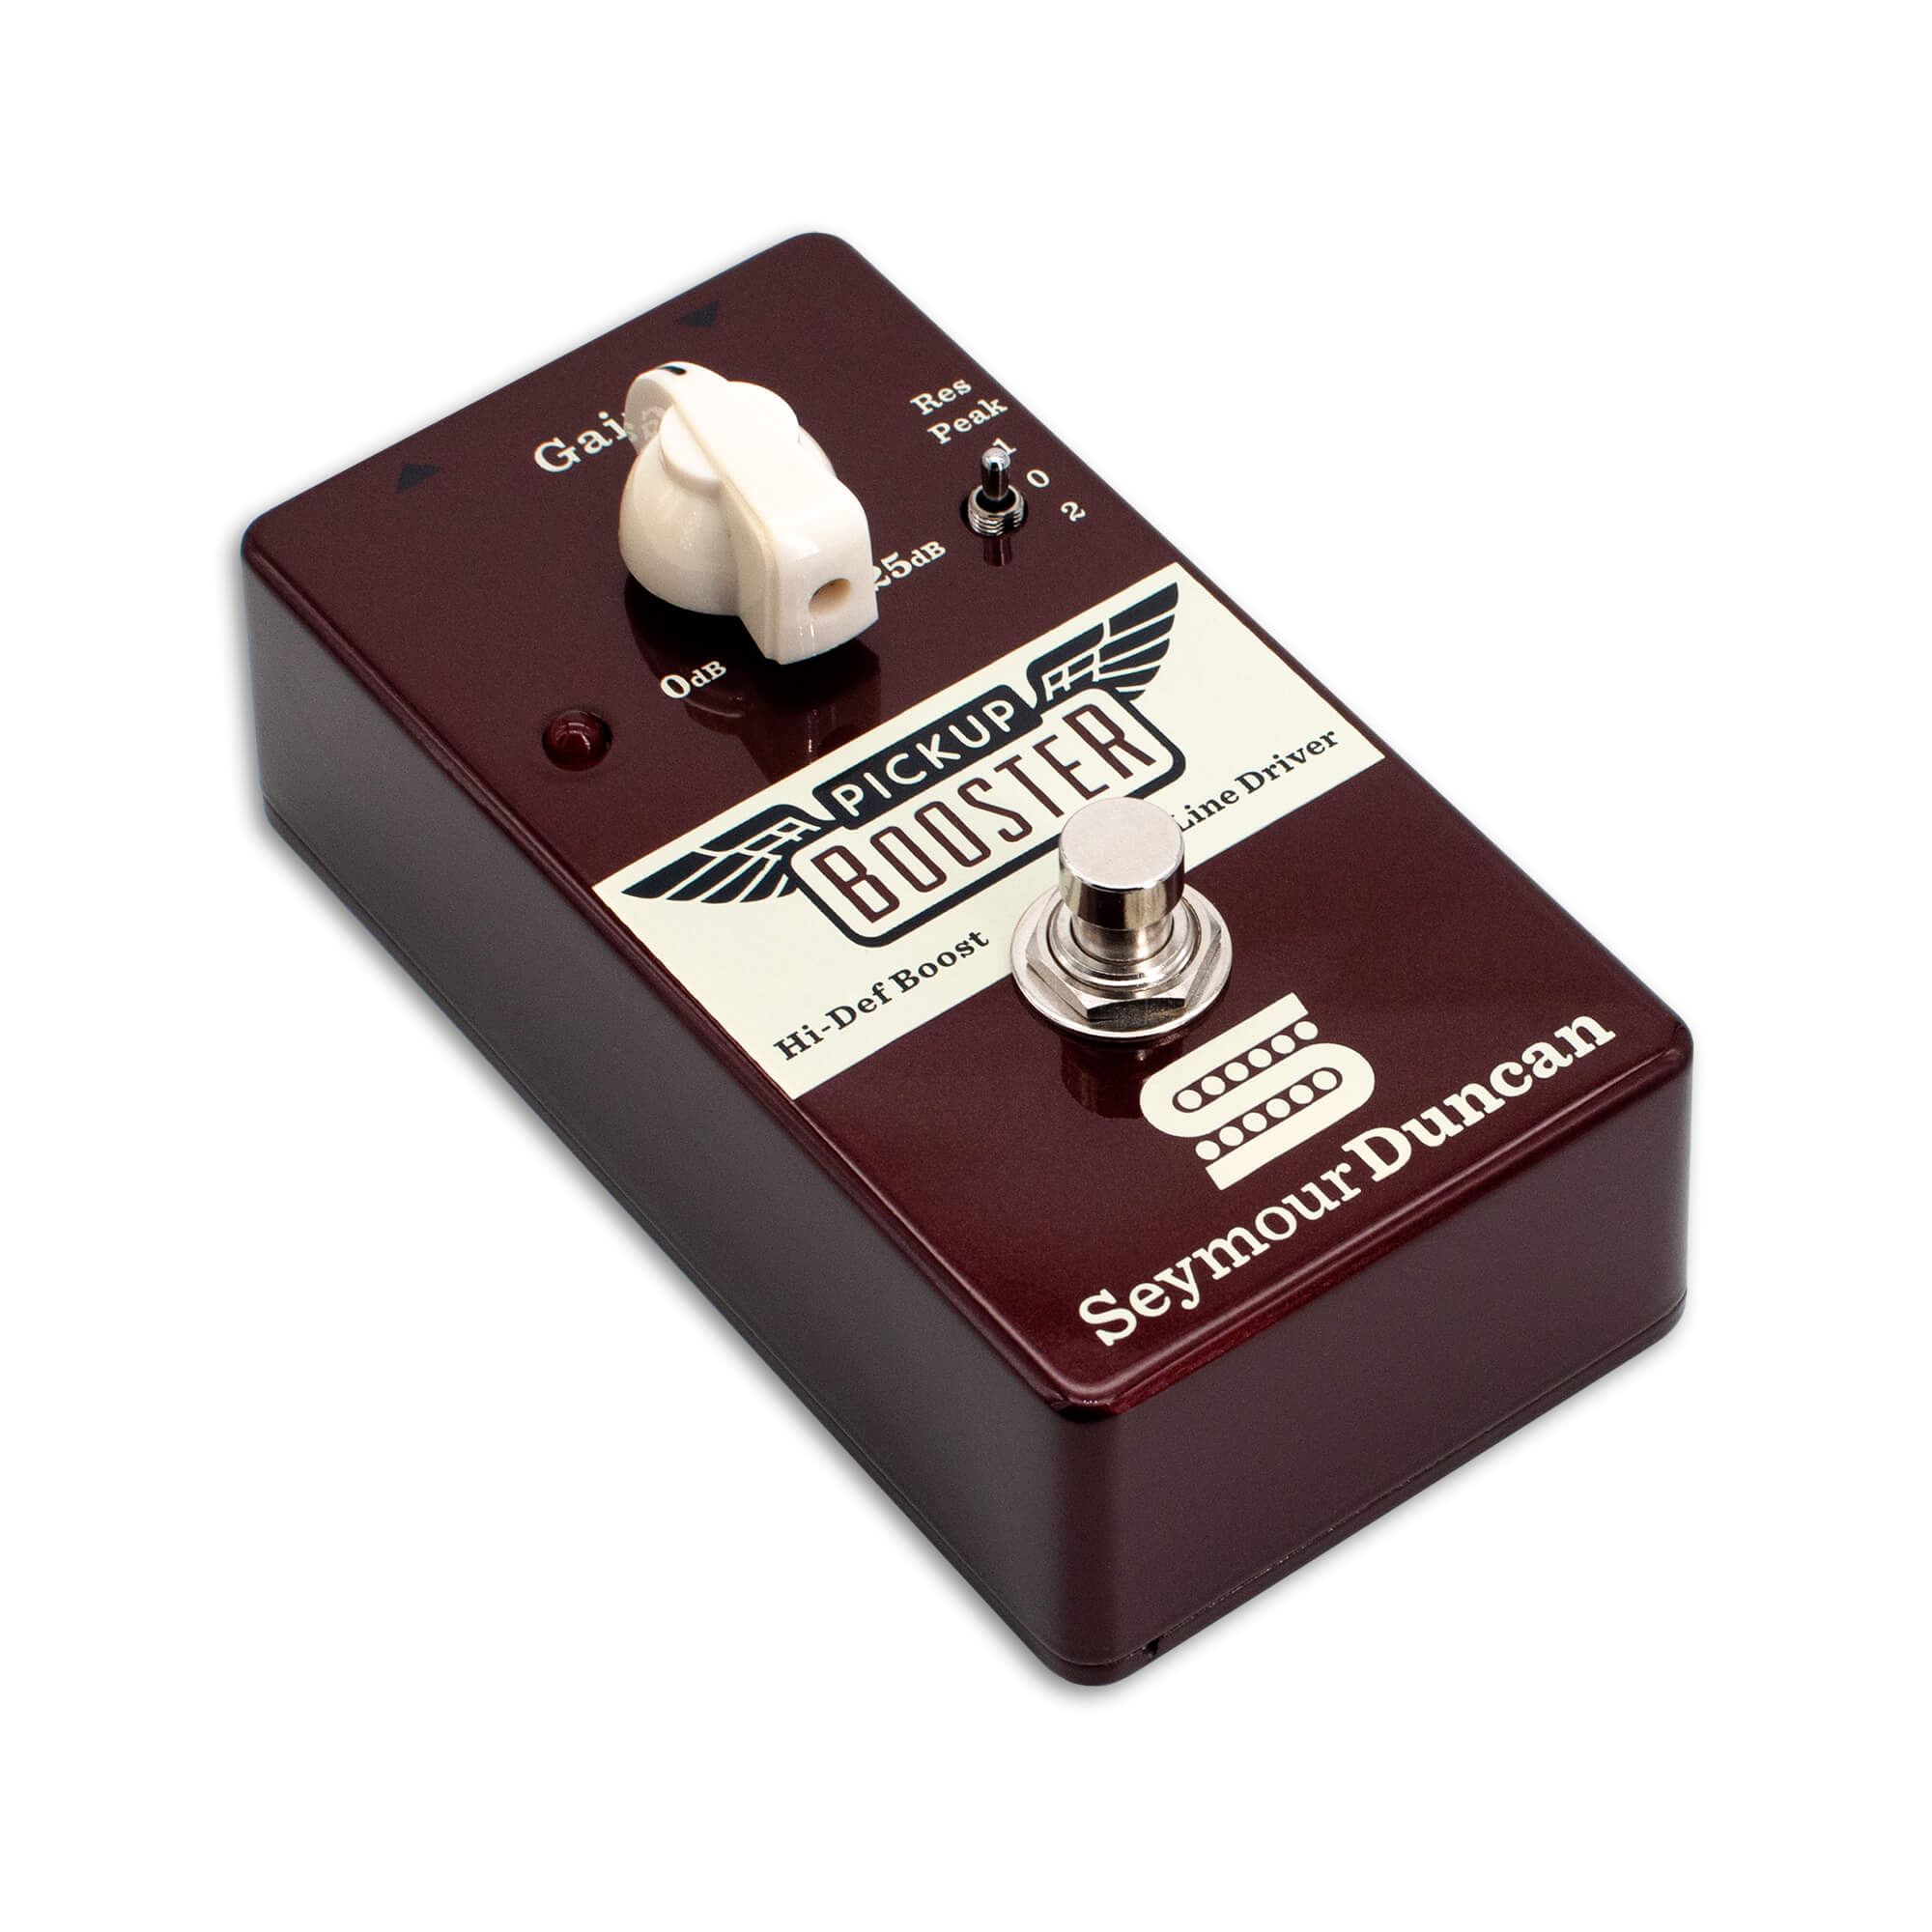 Tracing Journal: Seymour Duncan Pickup Booster - Aion FX